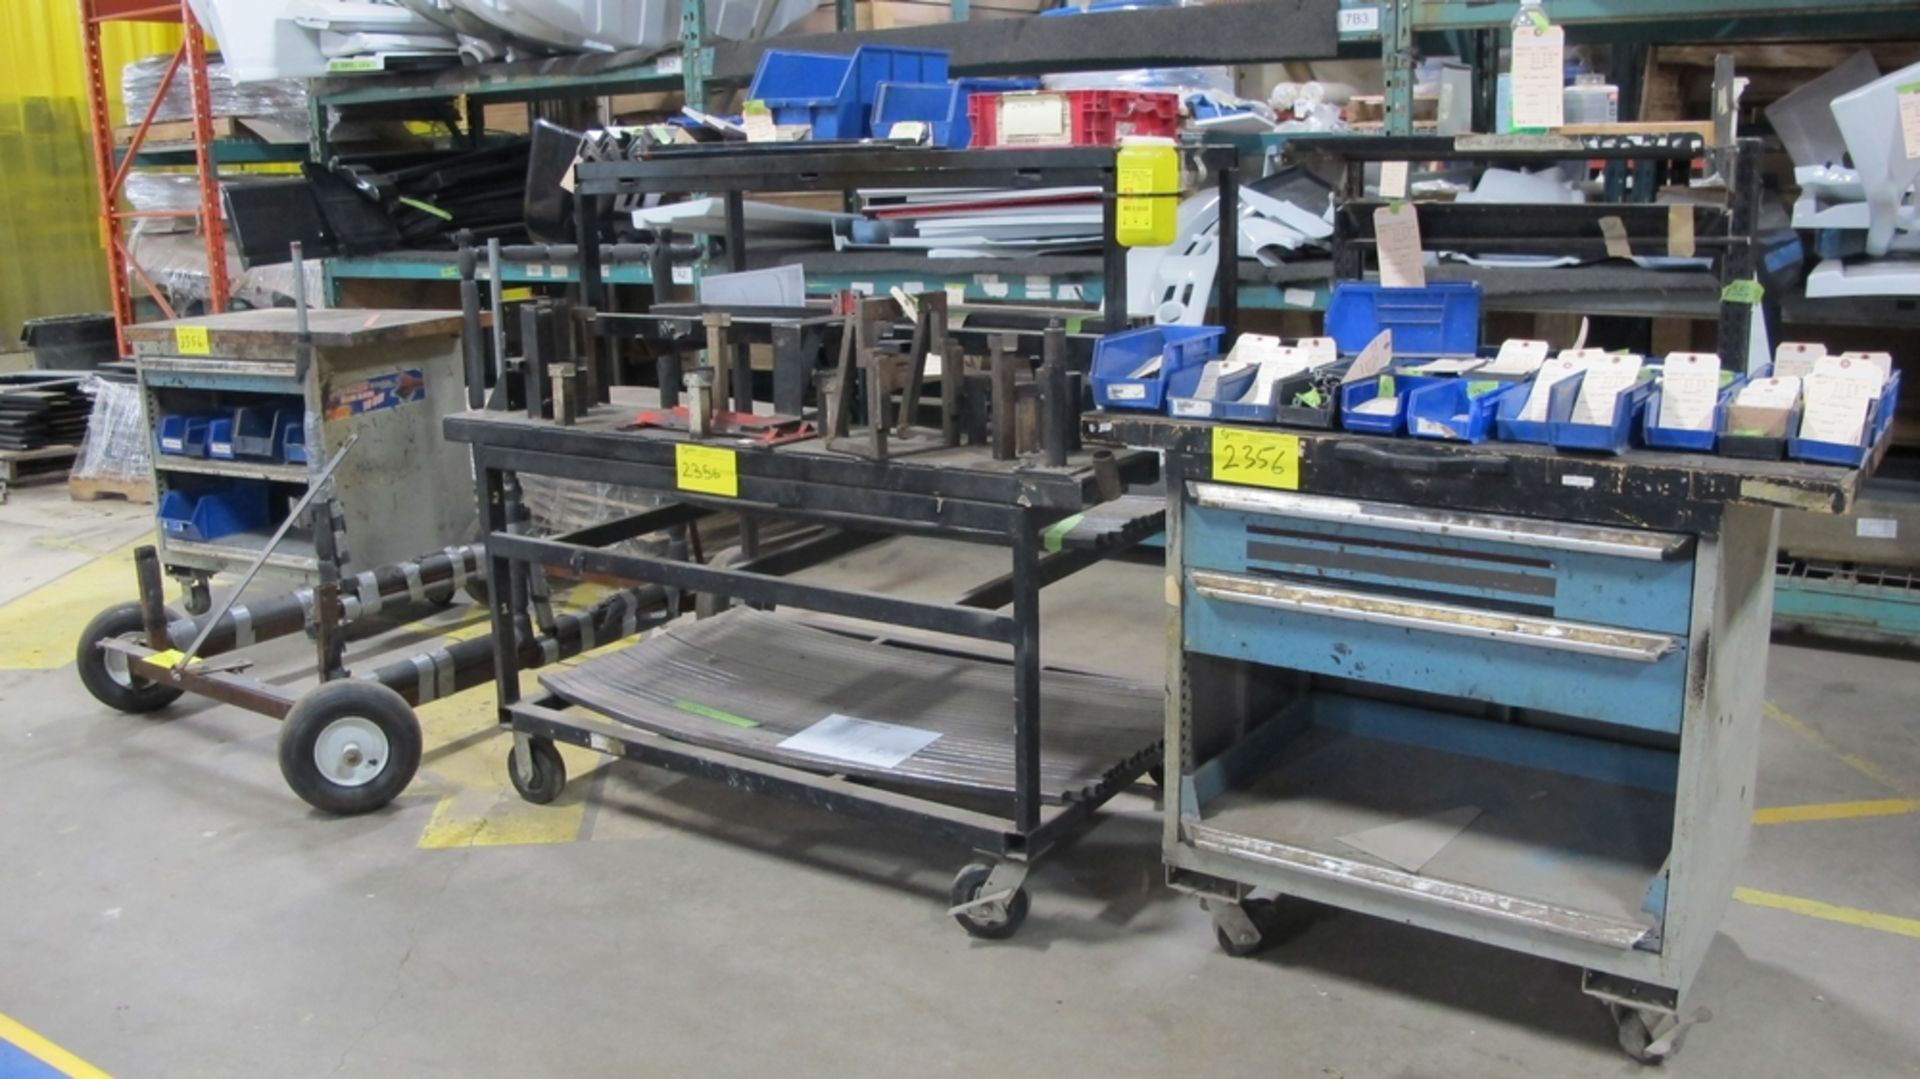 LOT OF 4 CARTS W/JIGS, TOOL BOXES, PARTS, ETC (100 SHIRLEY AVE KITCHENER) - Image 2 of 2